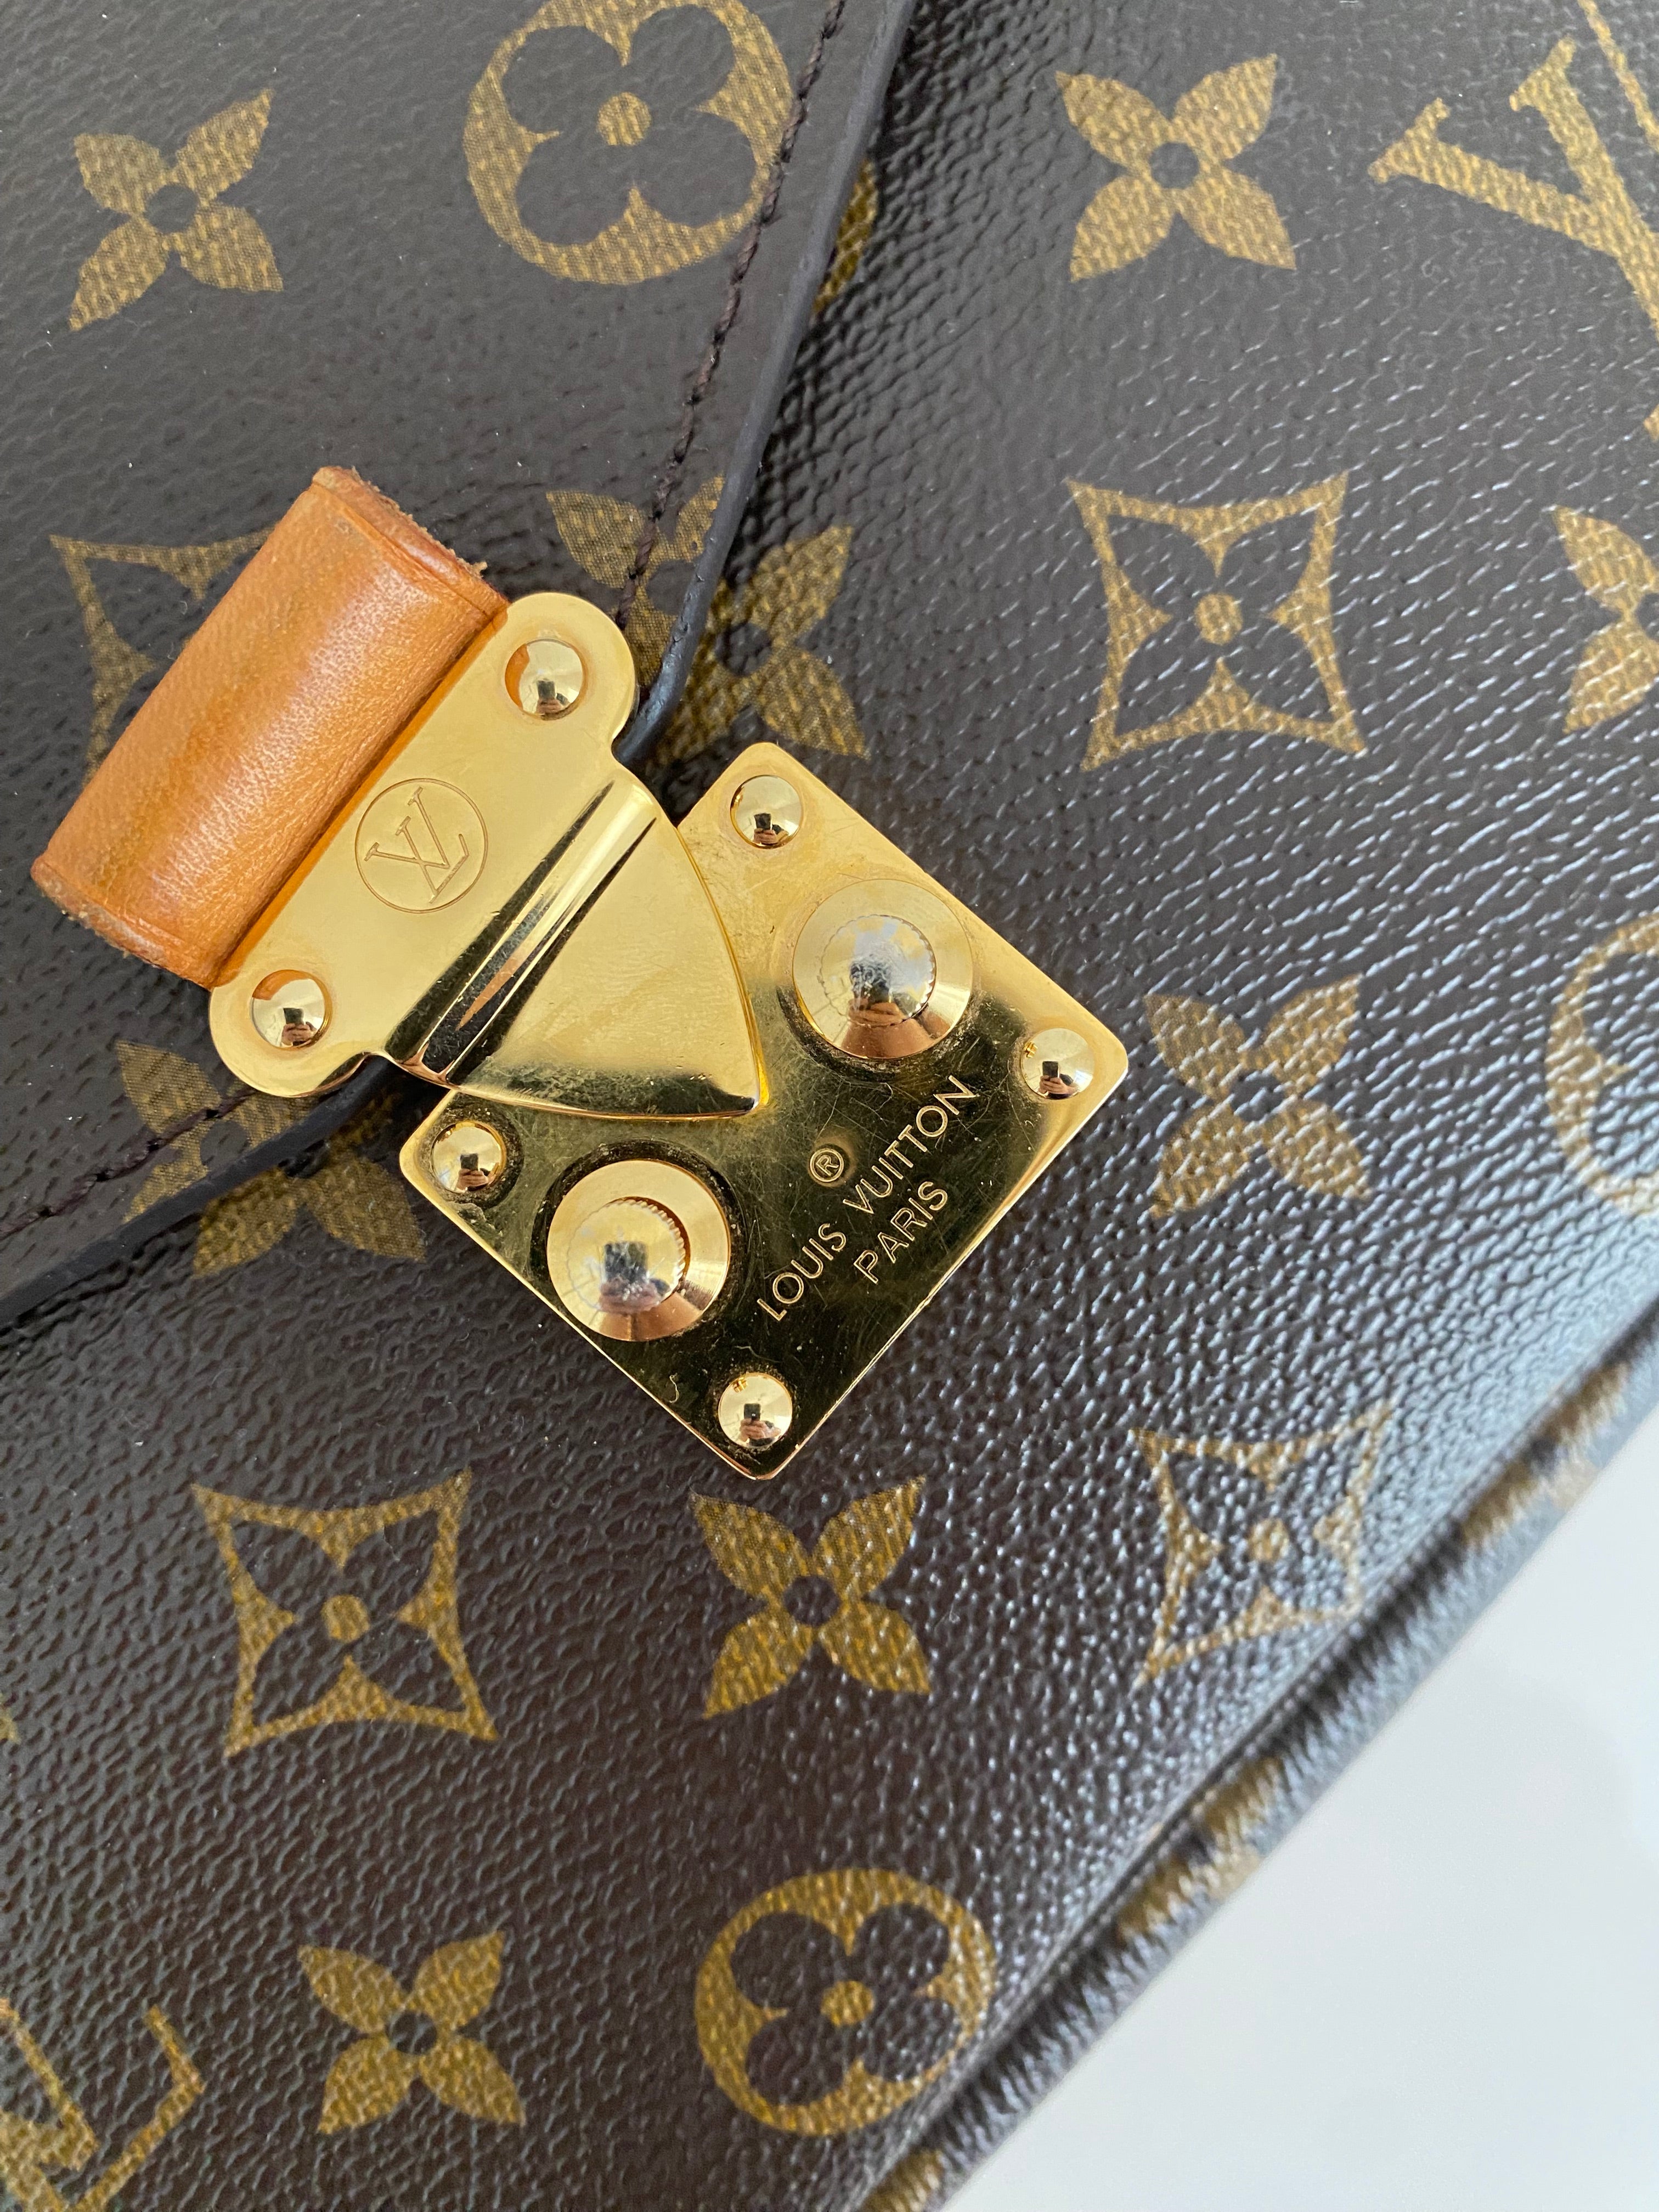 Exchanged my Pochette Metis - did I get a used one? The zipper is